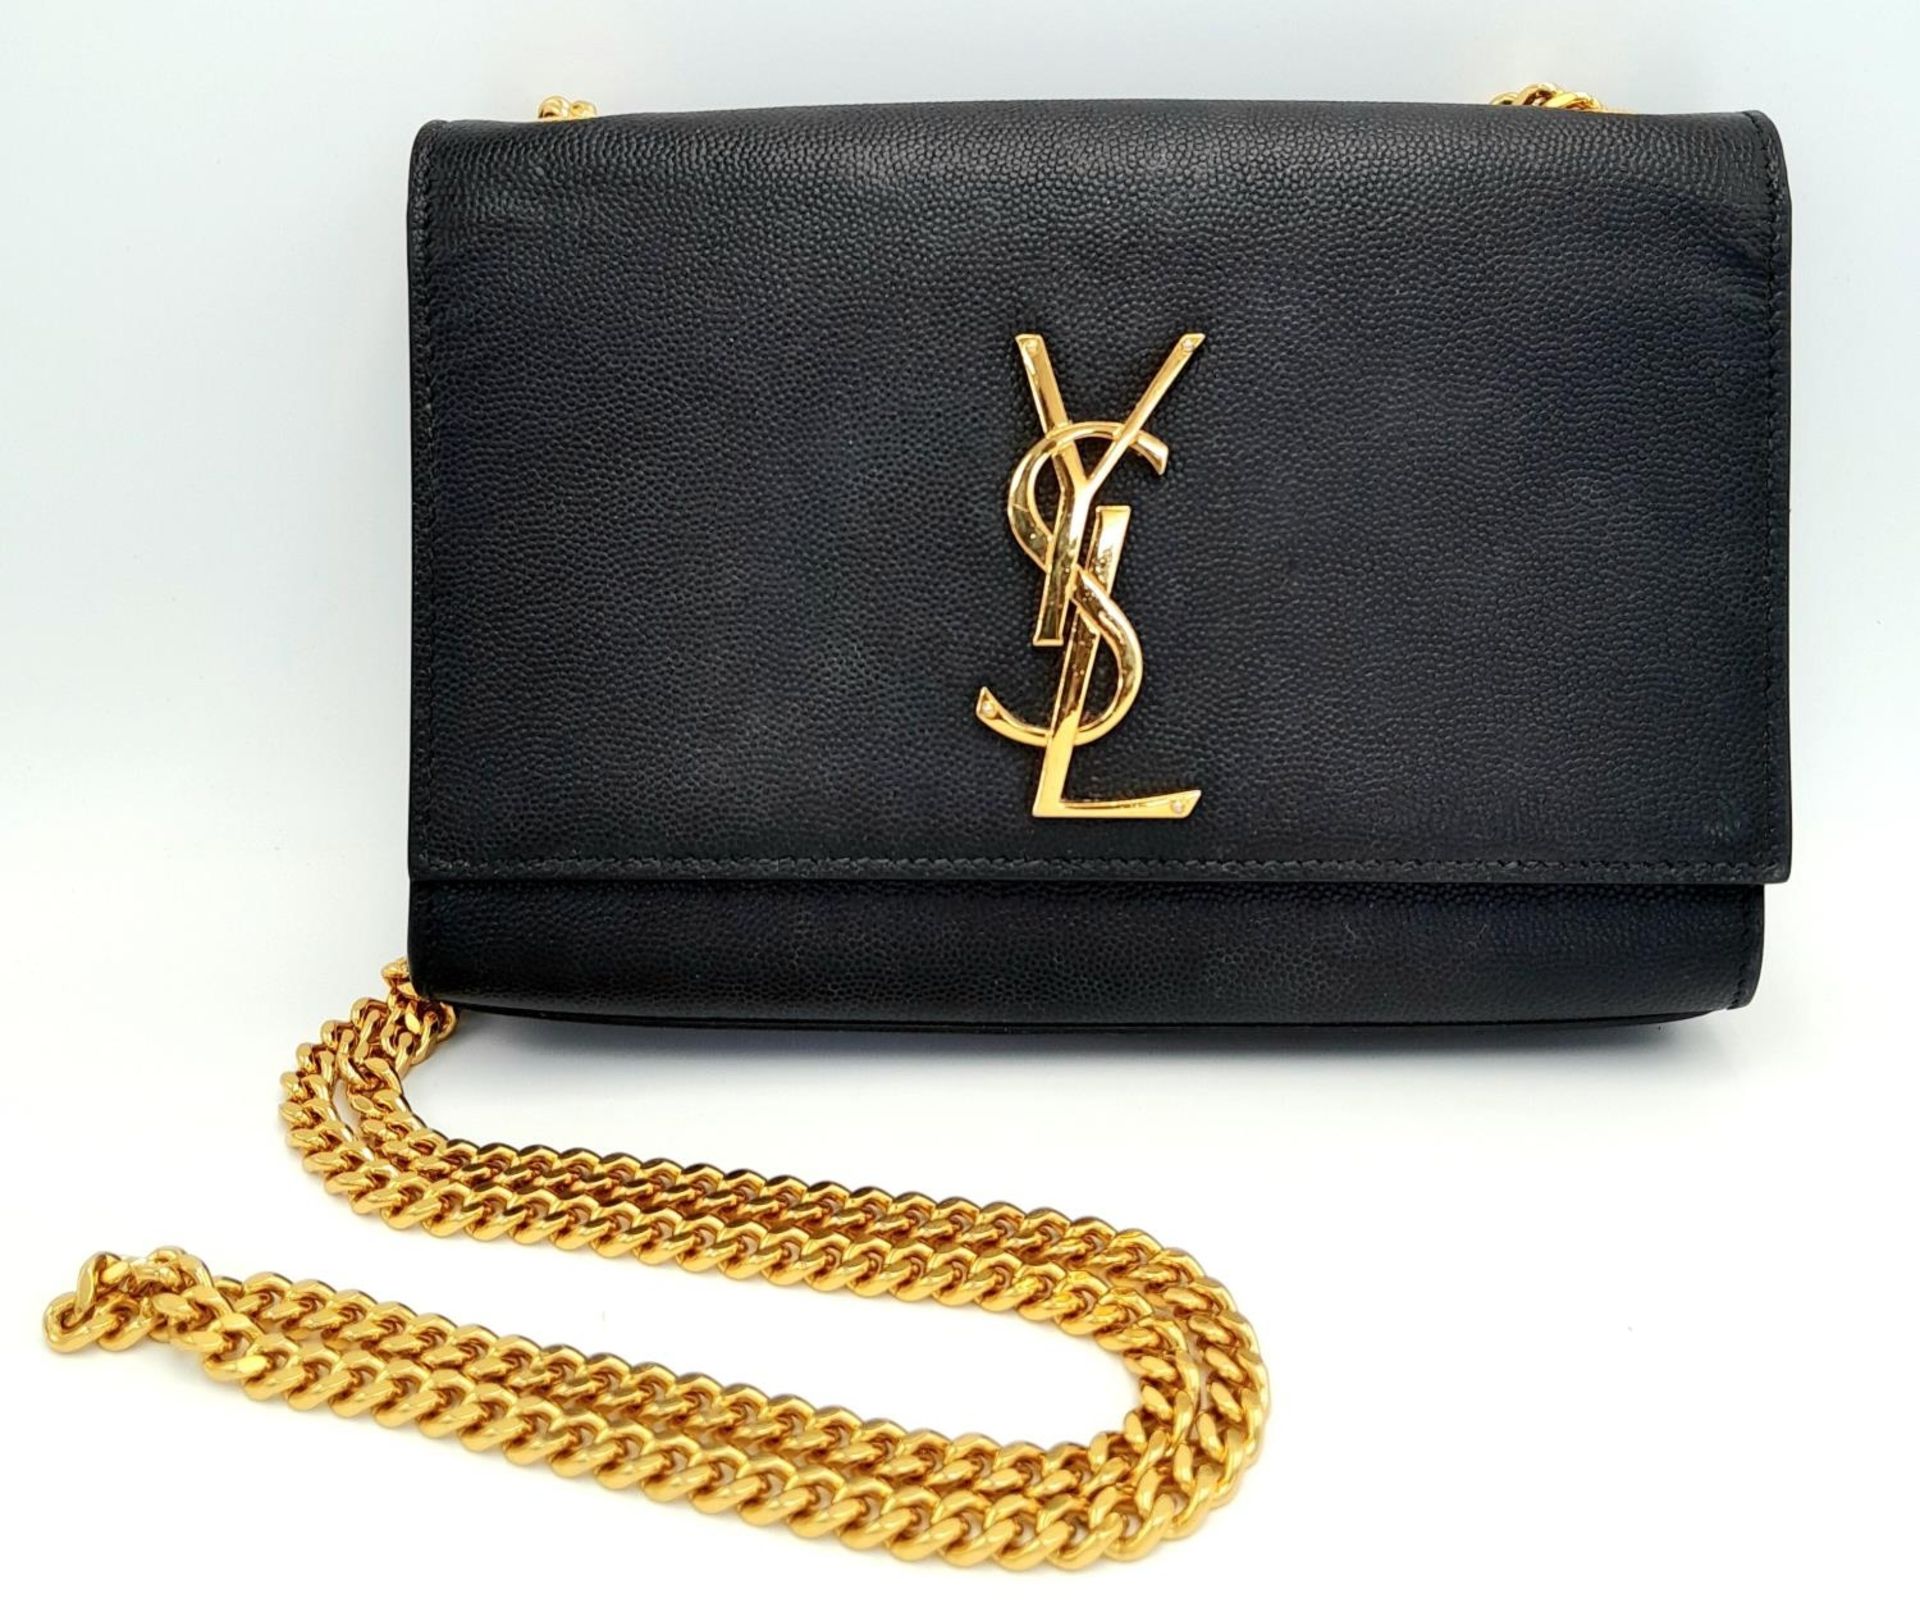 A Saint Laurent Black Kate Crossbody Bag. Leather exterior with gold-toned hardware, the iconic